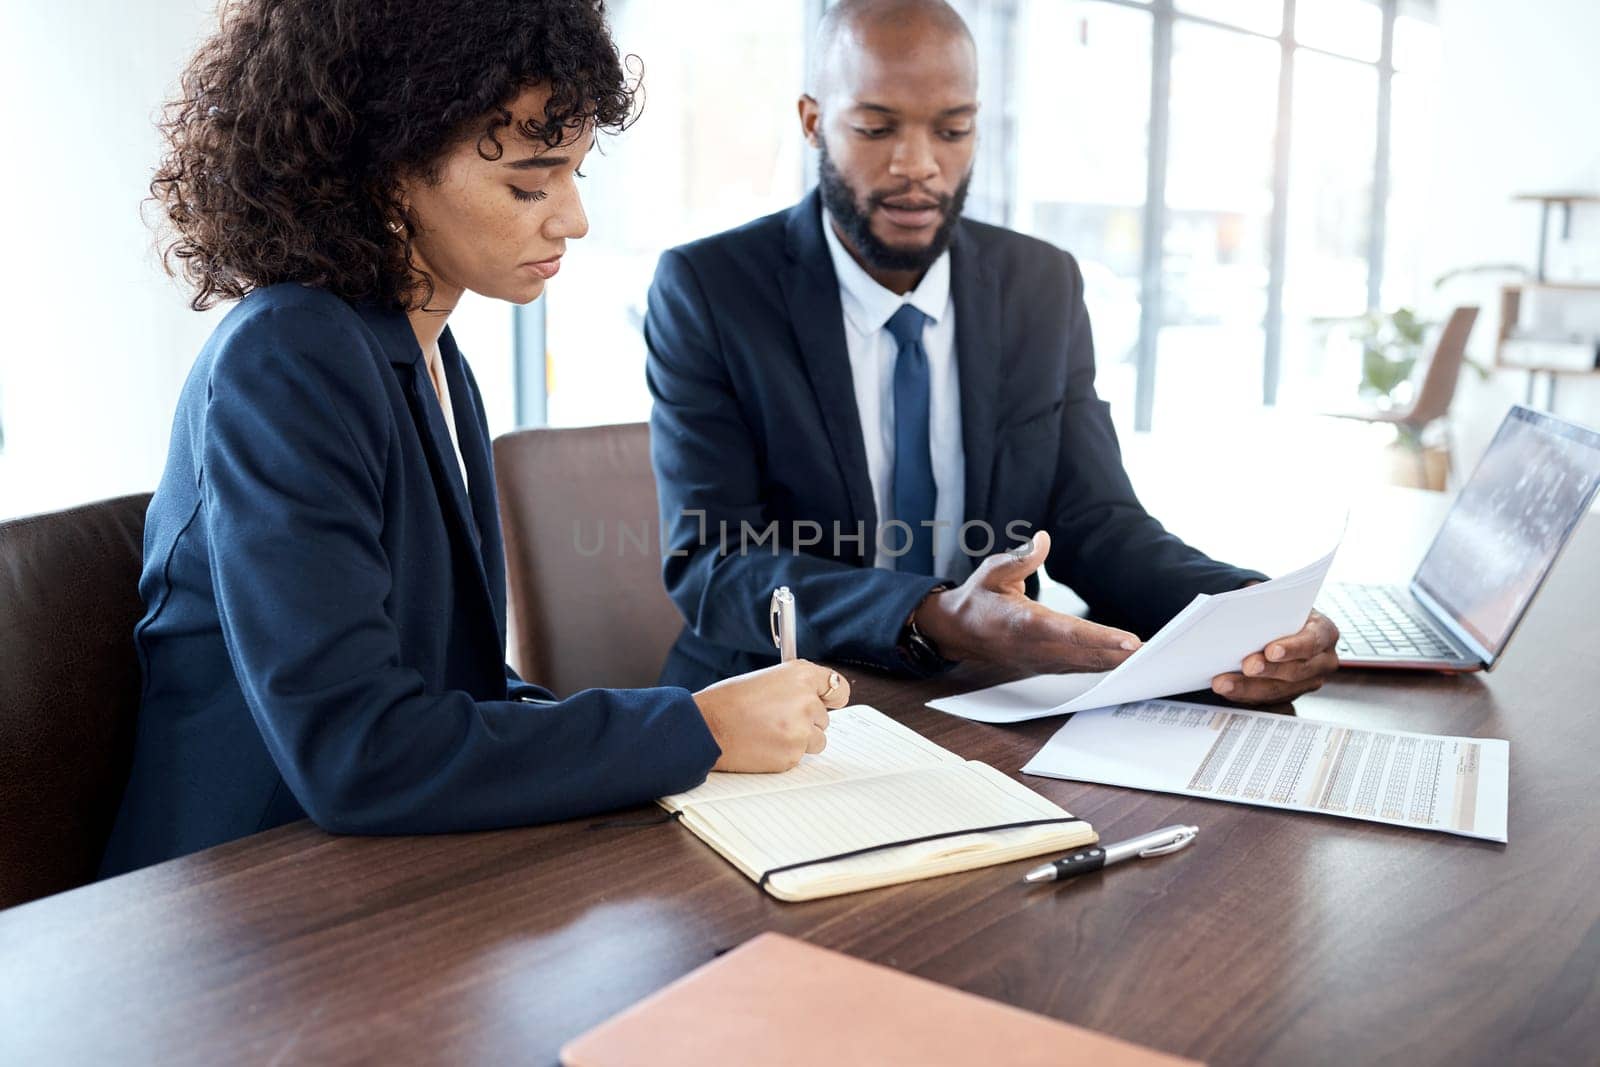 Accounting, paperwork and meeting black people for finance strategy, taxes report or budget review. Accountant, financial advisor or USA business manager with investment planning, advice or loan talk.